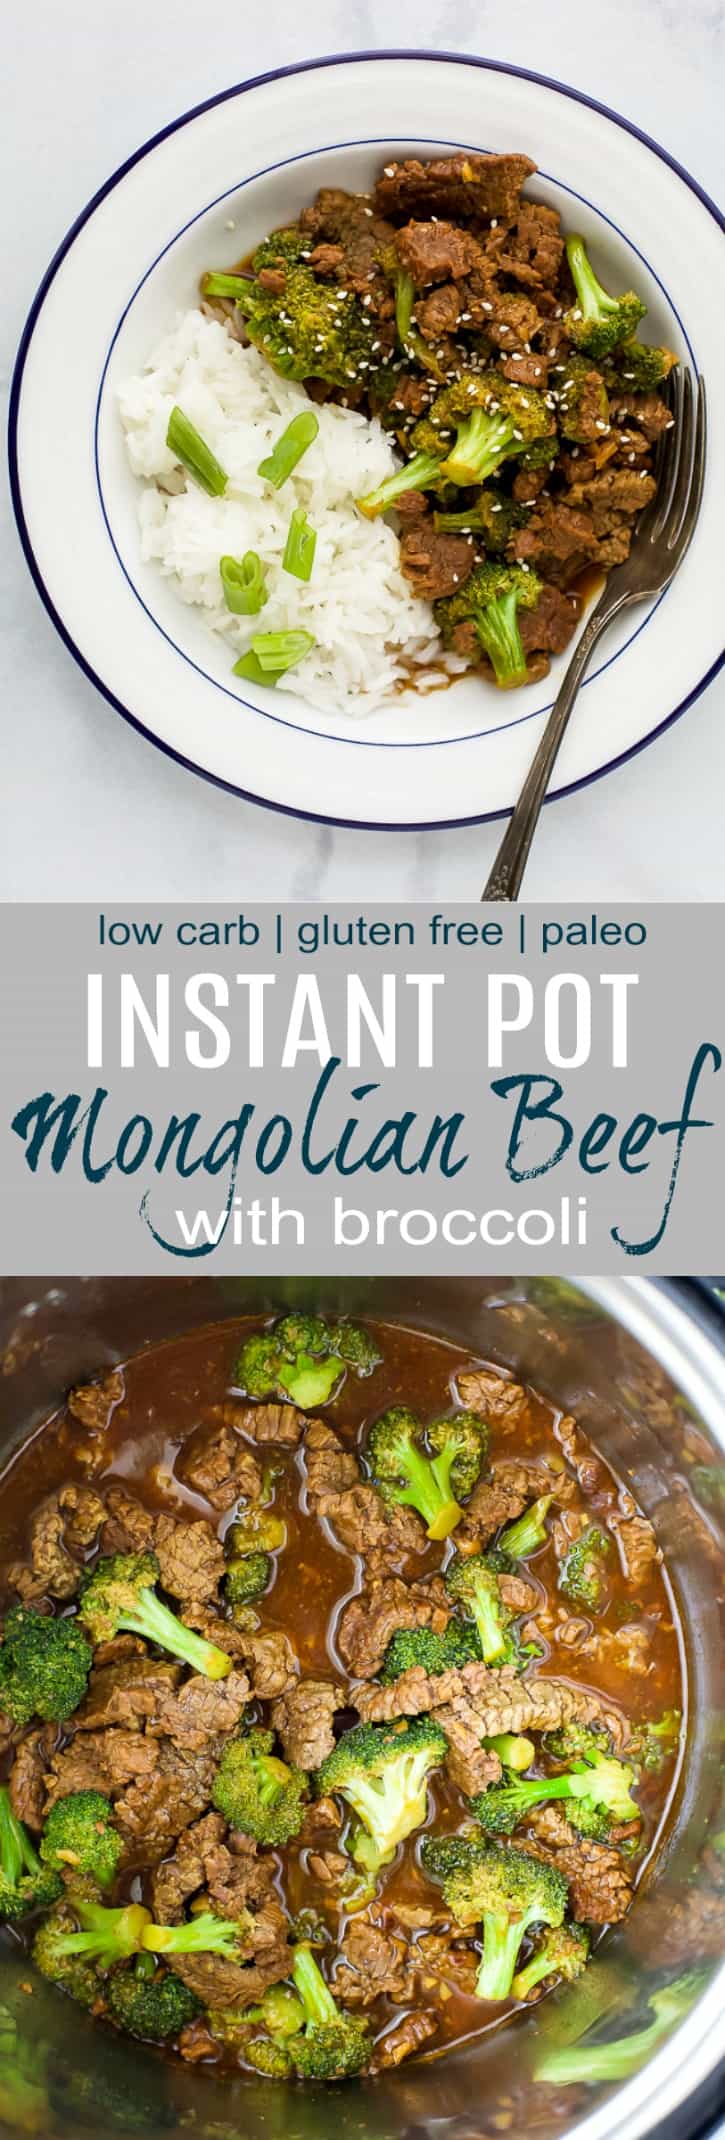 Instant Pot Mongolian Beef with broccoli recipe collage